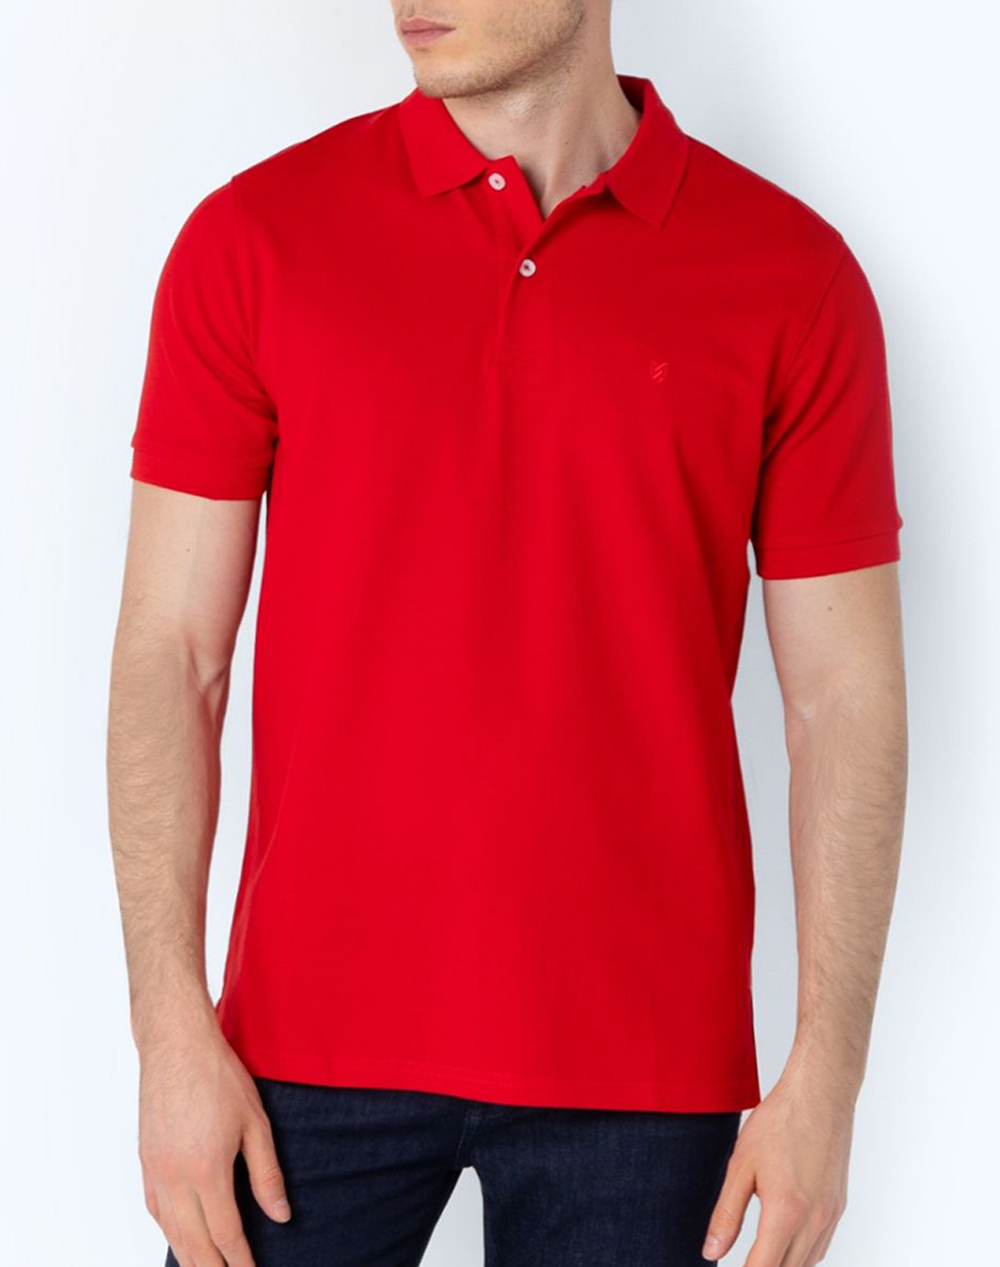 THE BOSTONIANS ΜΠΛΟΥΖΑ POLO PIQUE REGULAR FIT 3PS0001-Pomegranate FireRed 3820ABOST3410092_XR15949